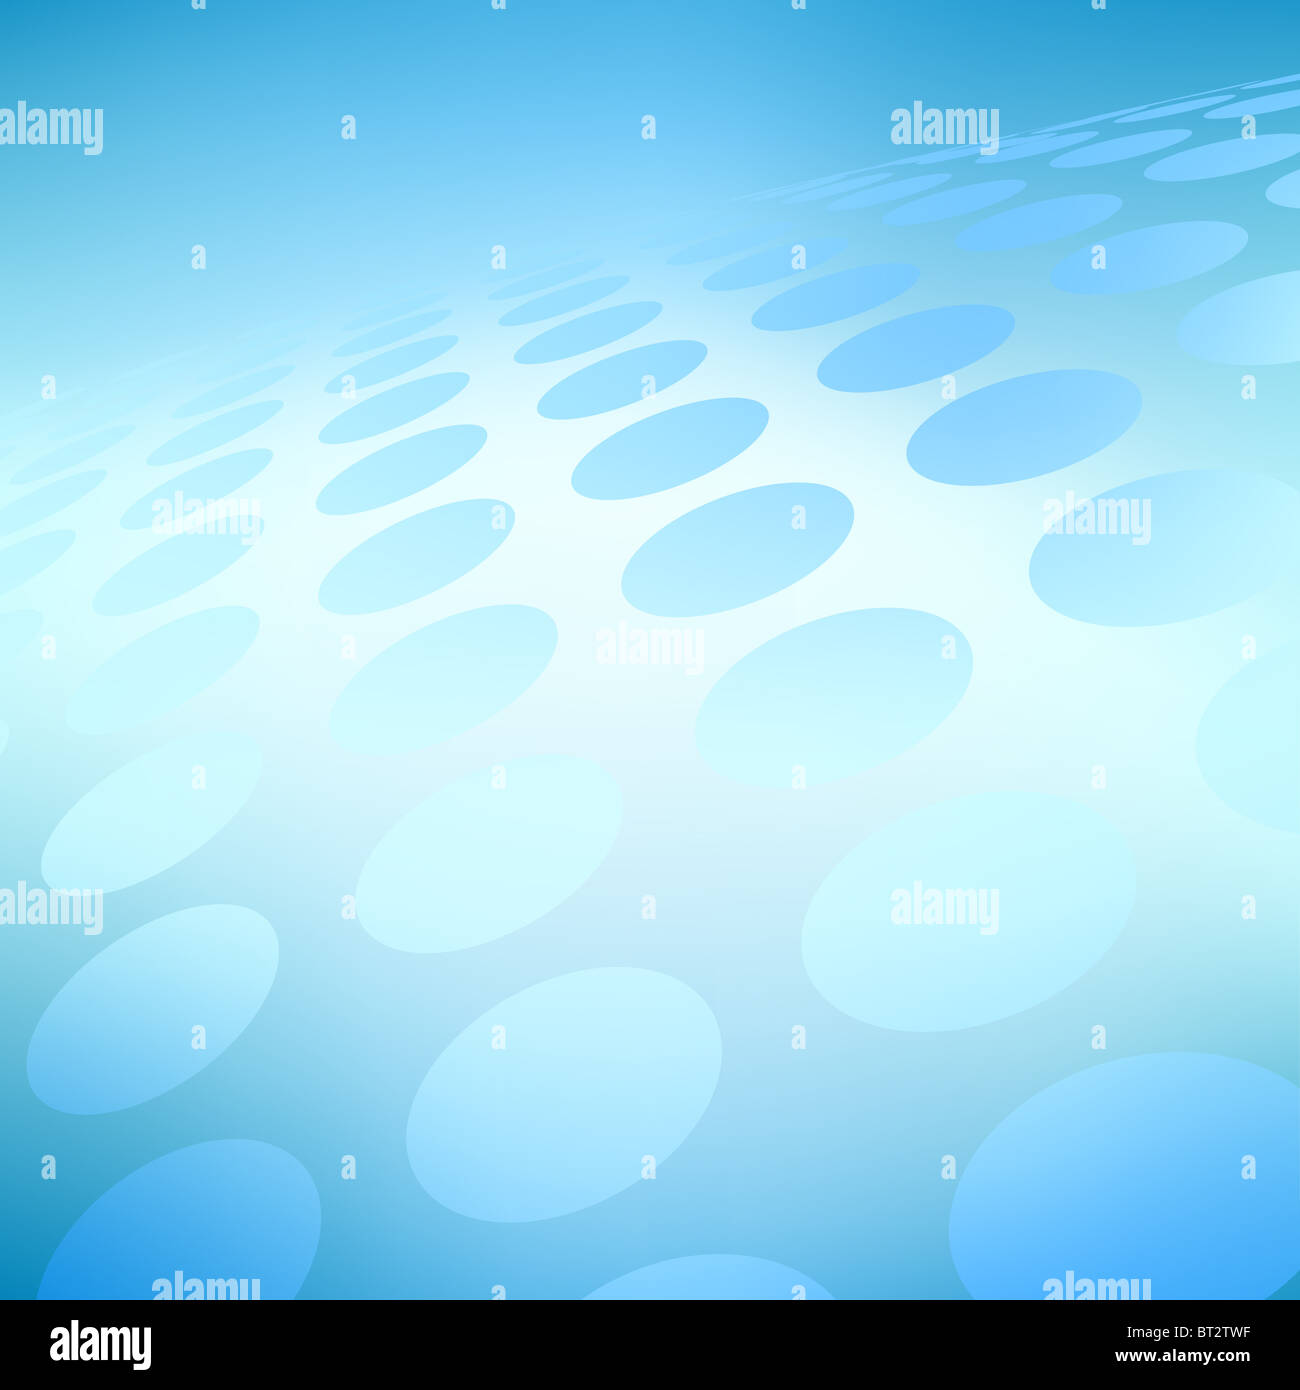 Abstract illustration of a blue halftone pattern Stock Photo